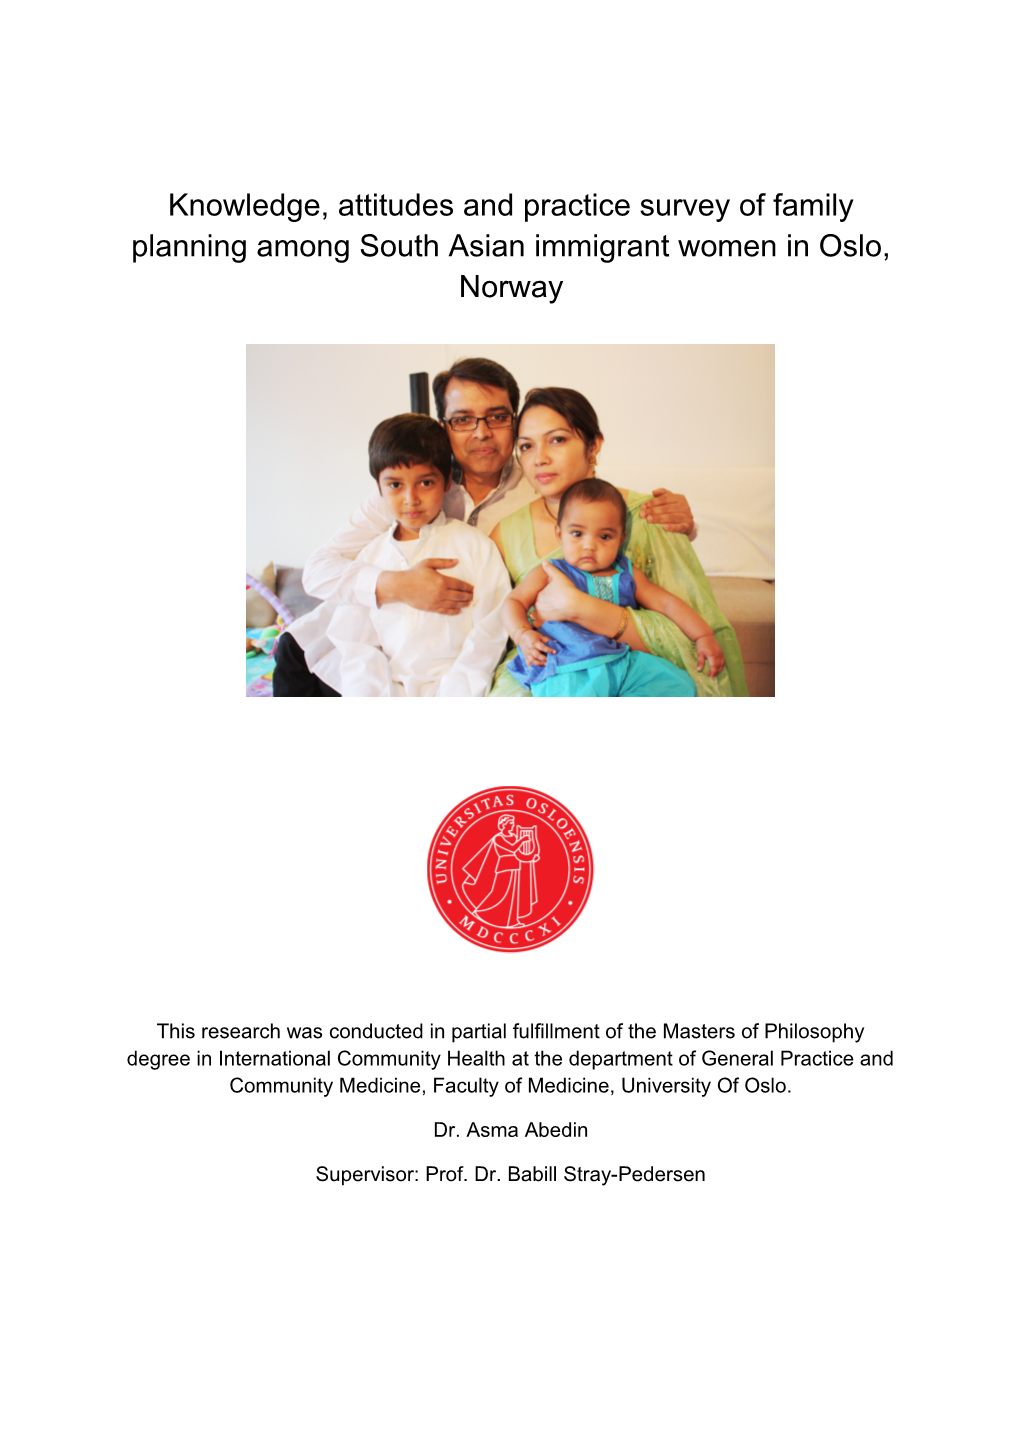 Knowledge, Attitudes and Practice Survey of Family Planning Among South Asian Immigrant